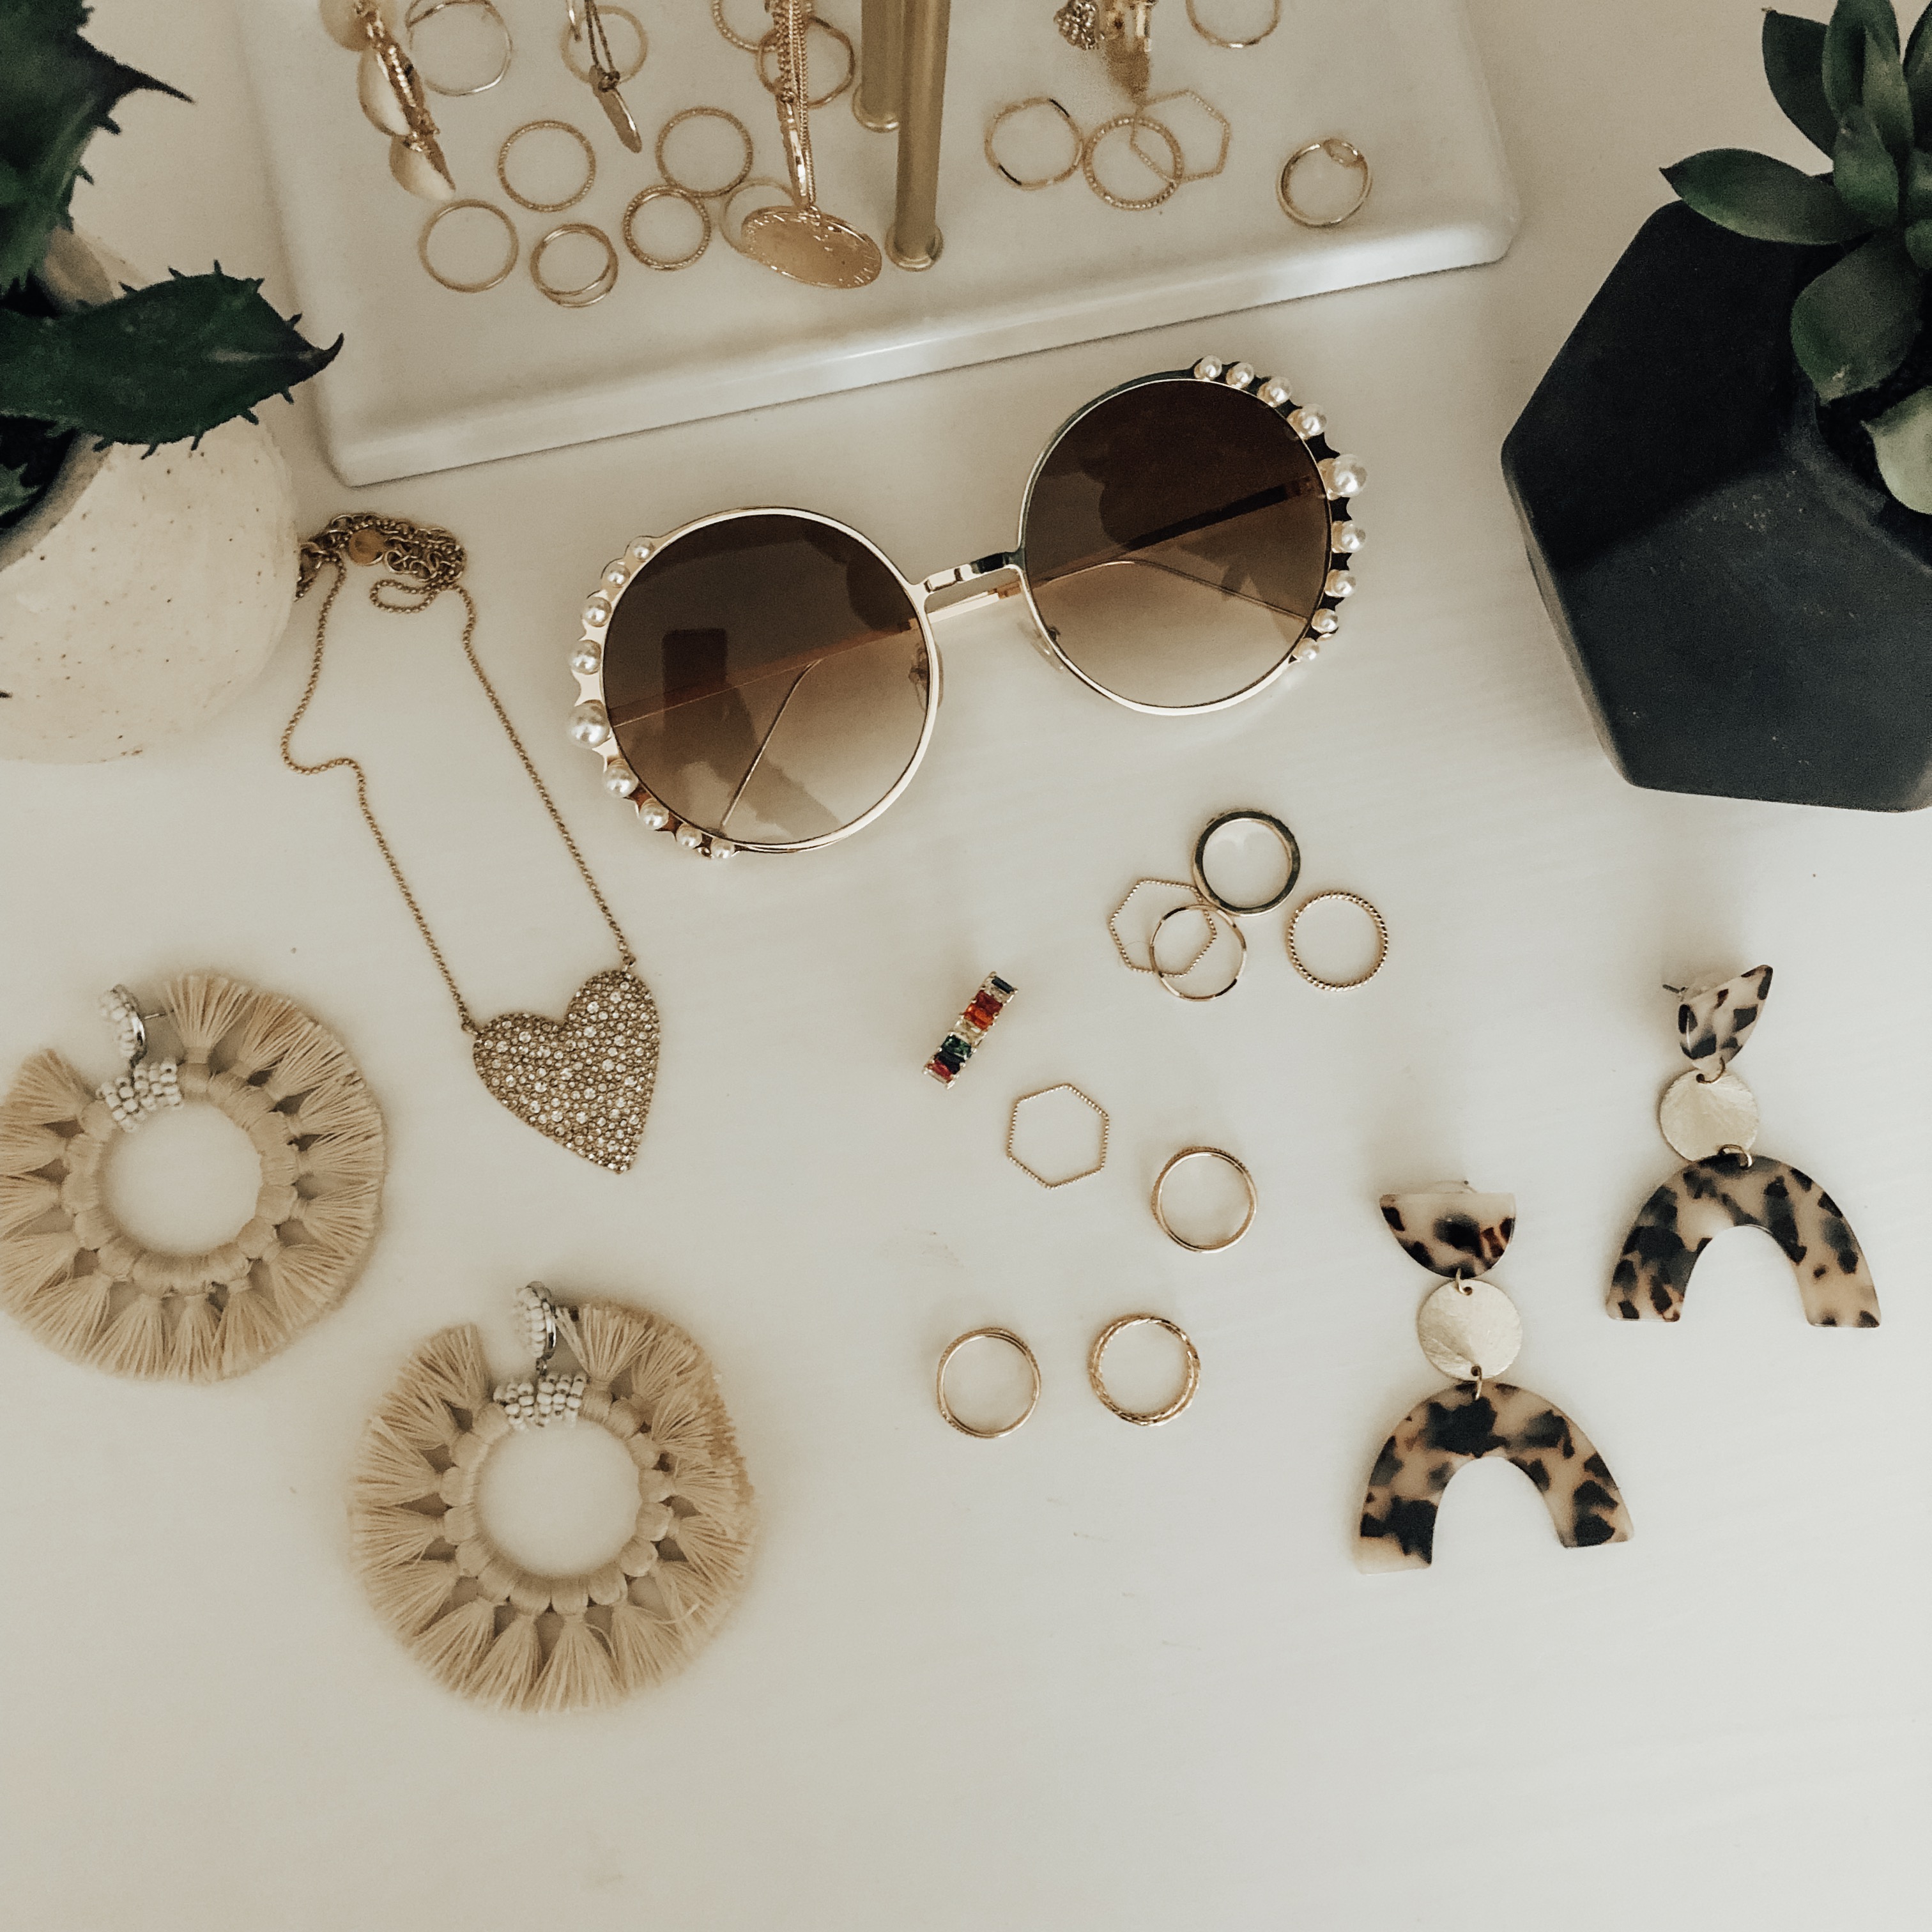 ALL THE CURRENT JEWELRY TRENDS + THE BEST AFFORDABLE DUPES- Jaclyn De Leon Style + I'm dishing on all my favorite current jewelry trends from statement earrins to delicate layering necklaces and finding all the best designer dupes!